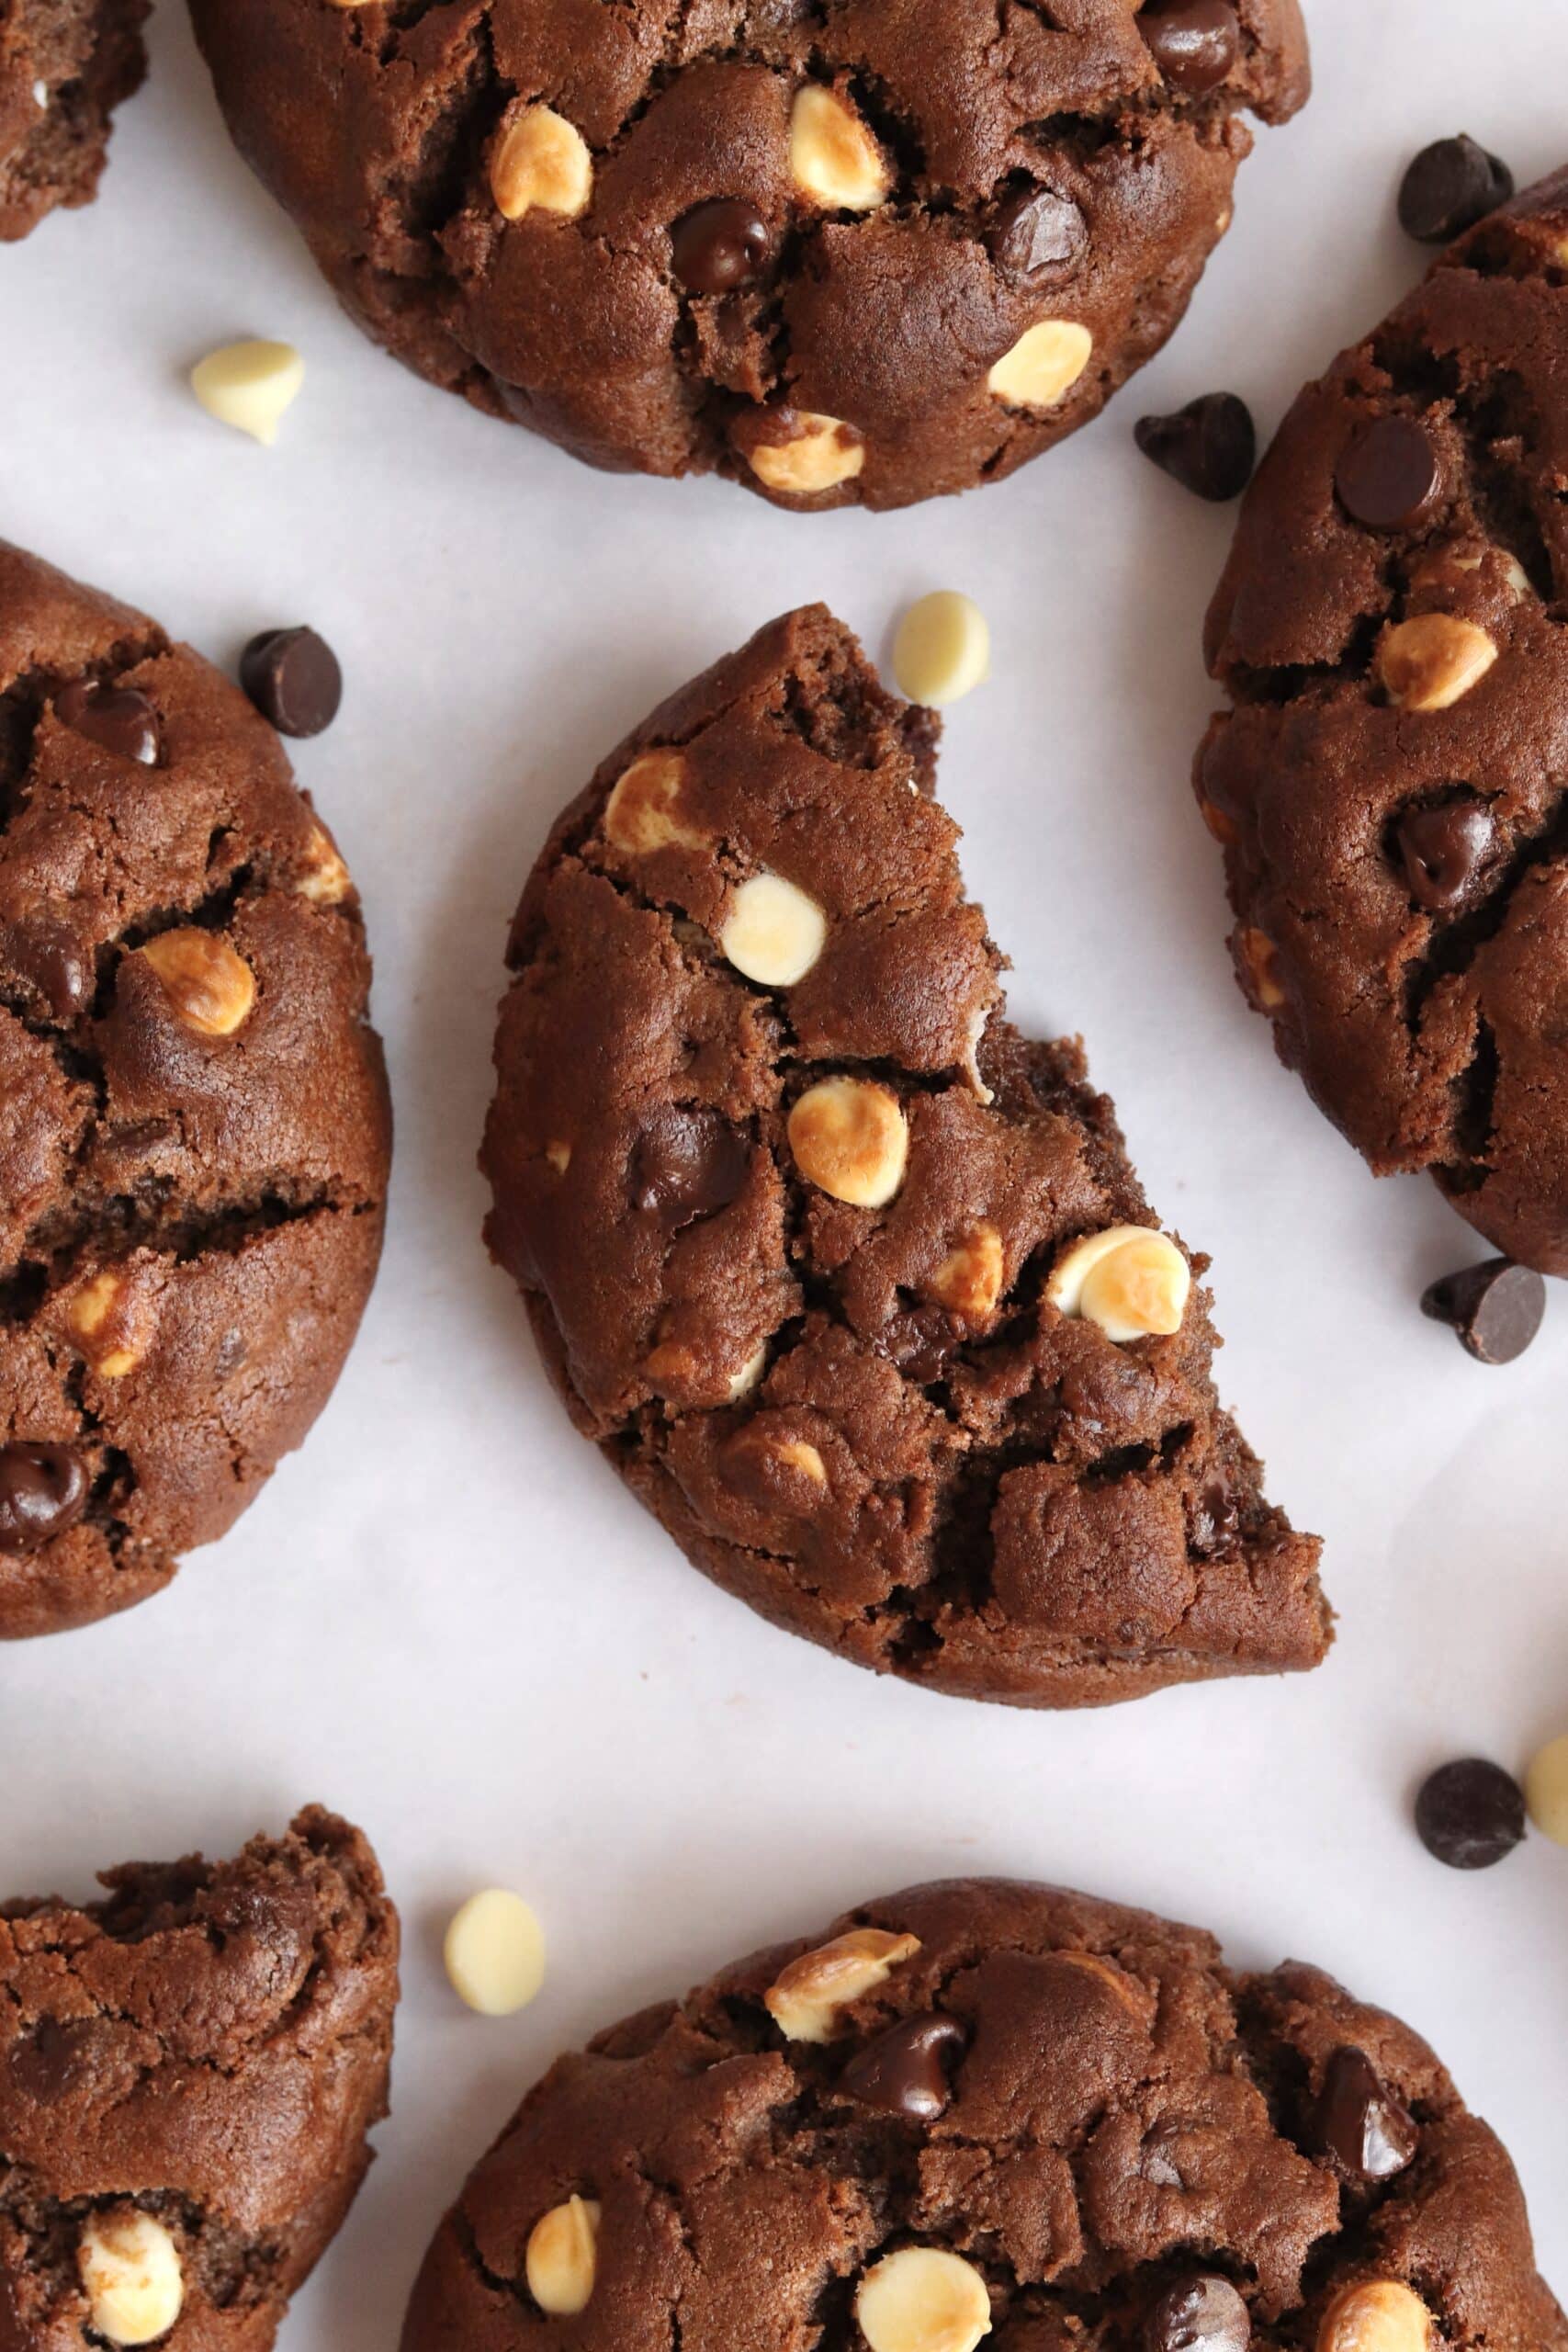 Triple chocolate cookies with scattered chocolate chips